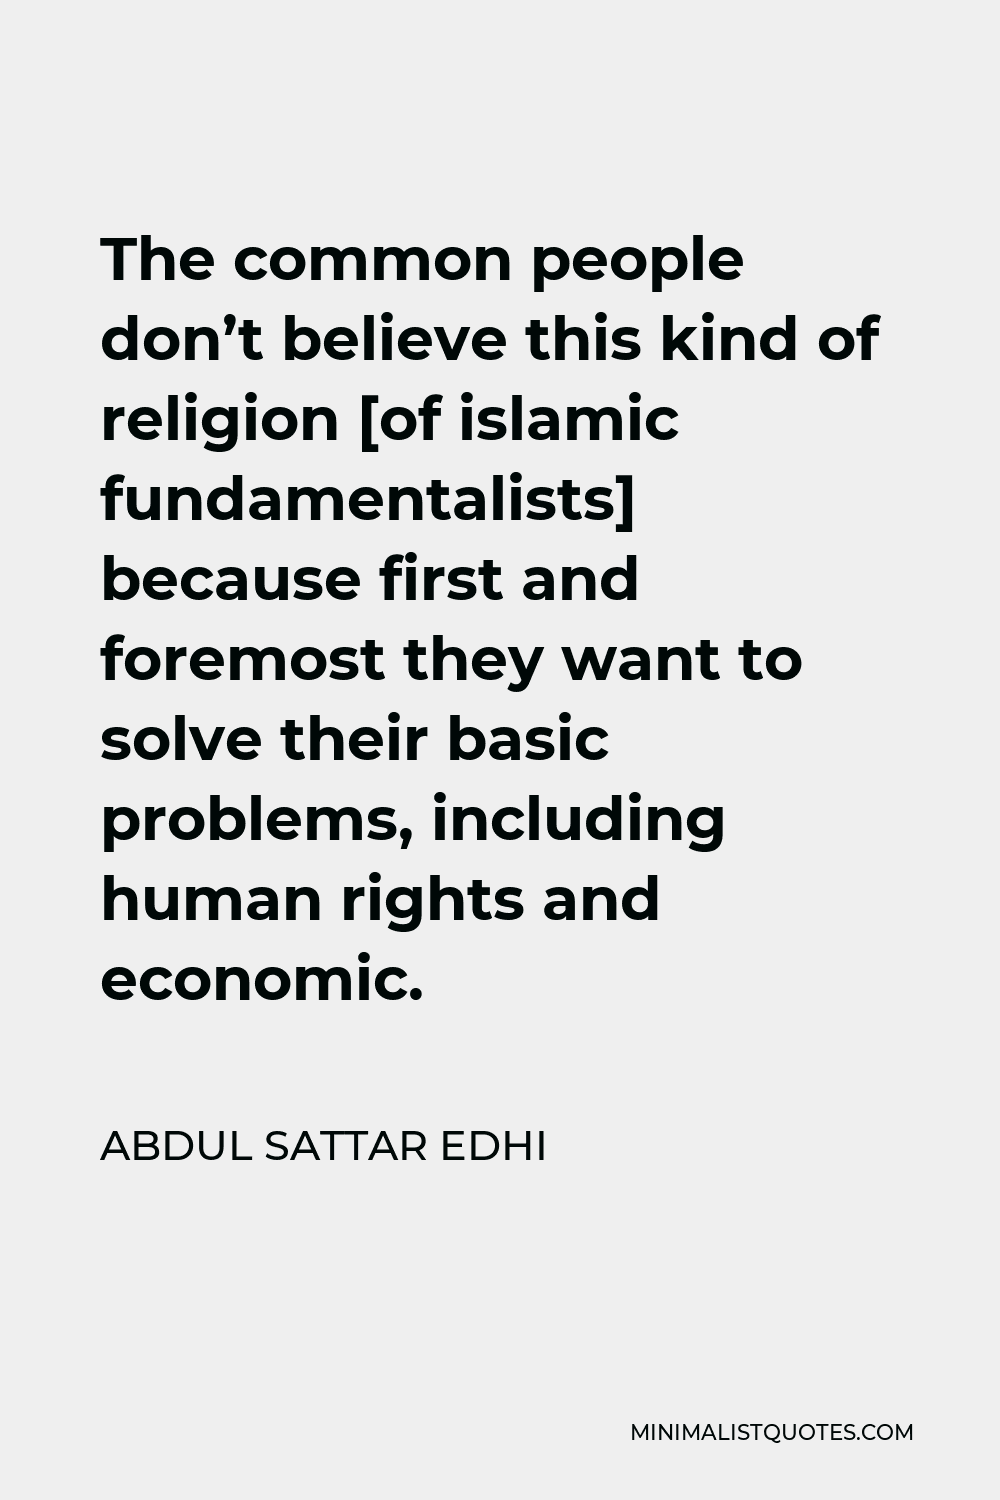 Abdul Sattar Edhi Quote - The common people don’t believe this kind of religion [of islamic fundamentalists] because first and foremost they want to solve their basic problems, including human rights and economic.